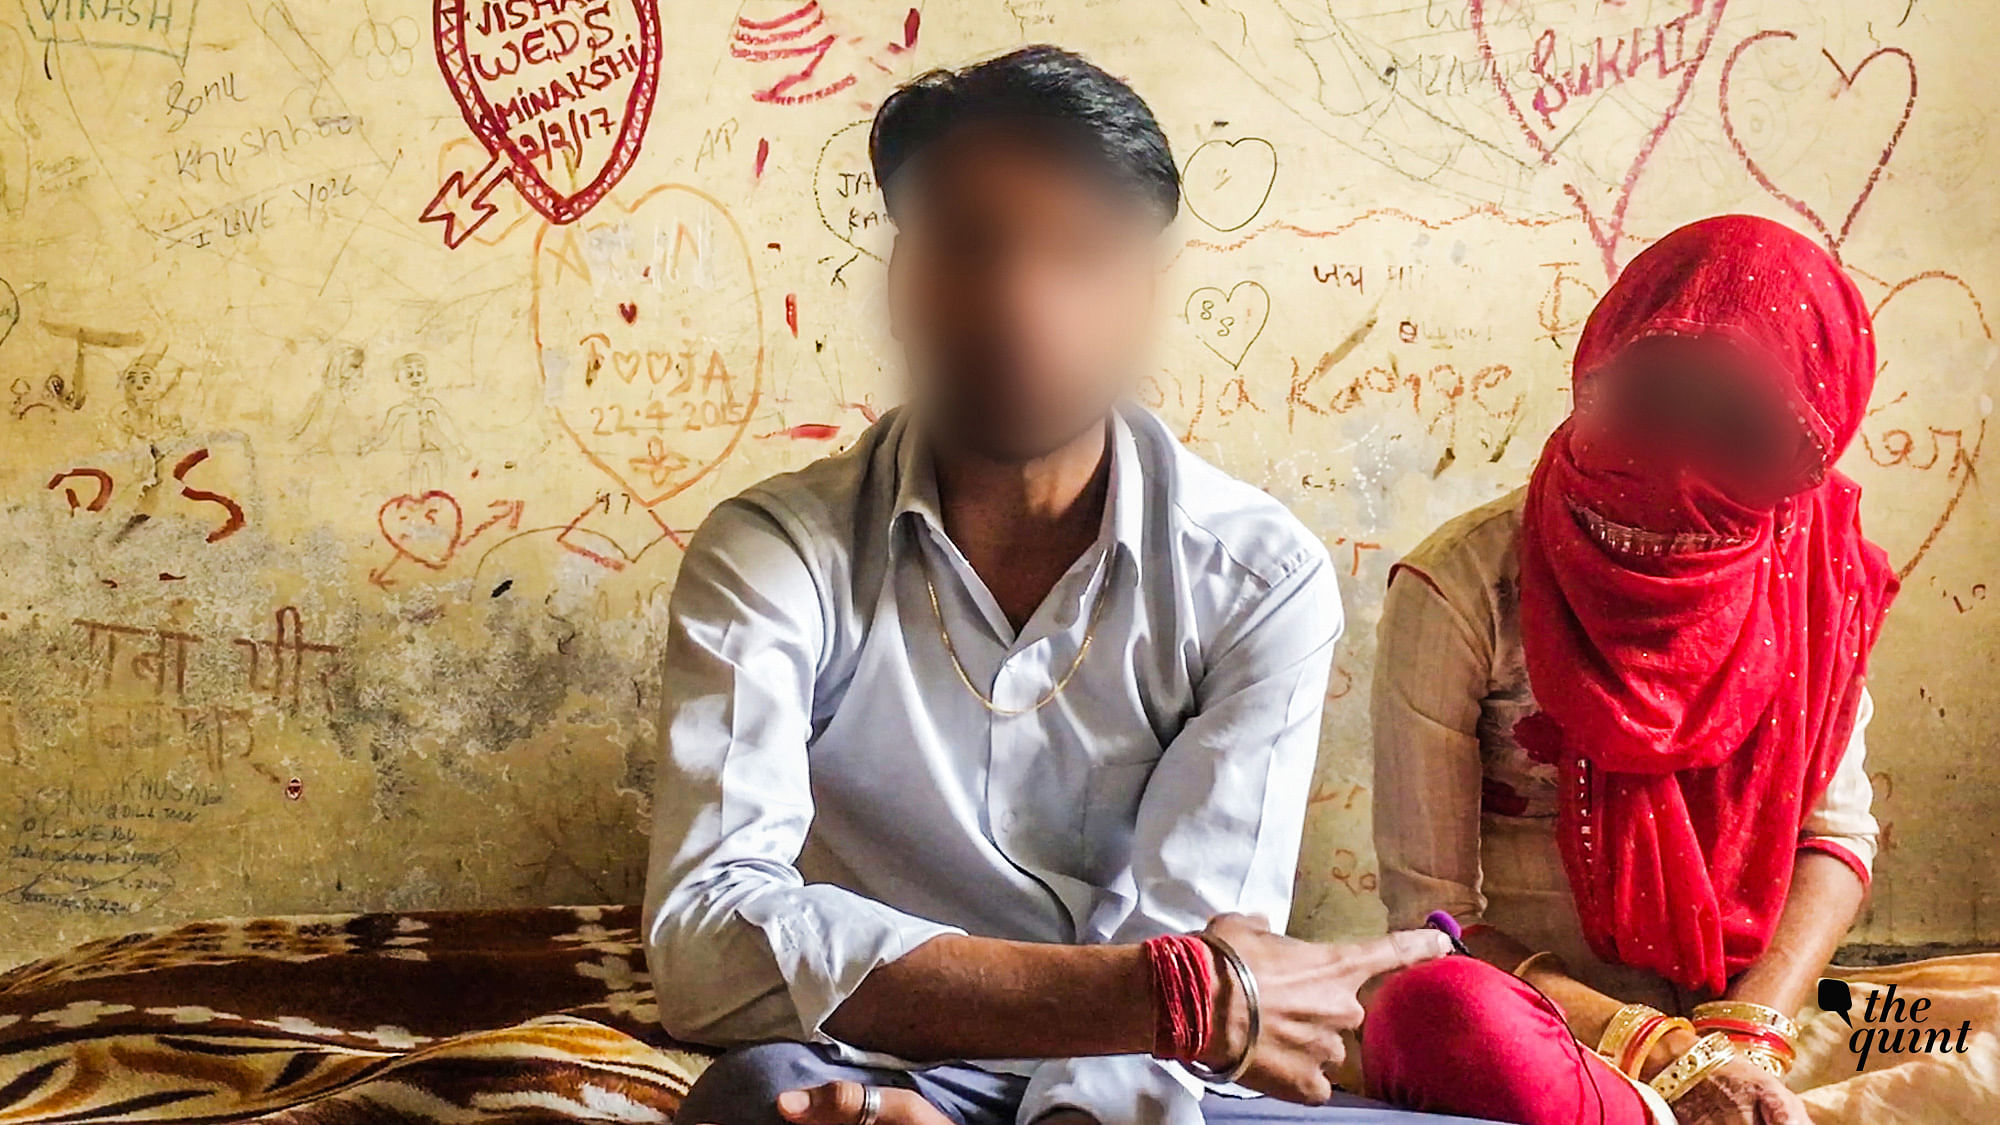 A newly-wed couple inside a ‘safe house’ in Haryana.